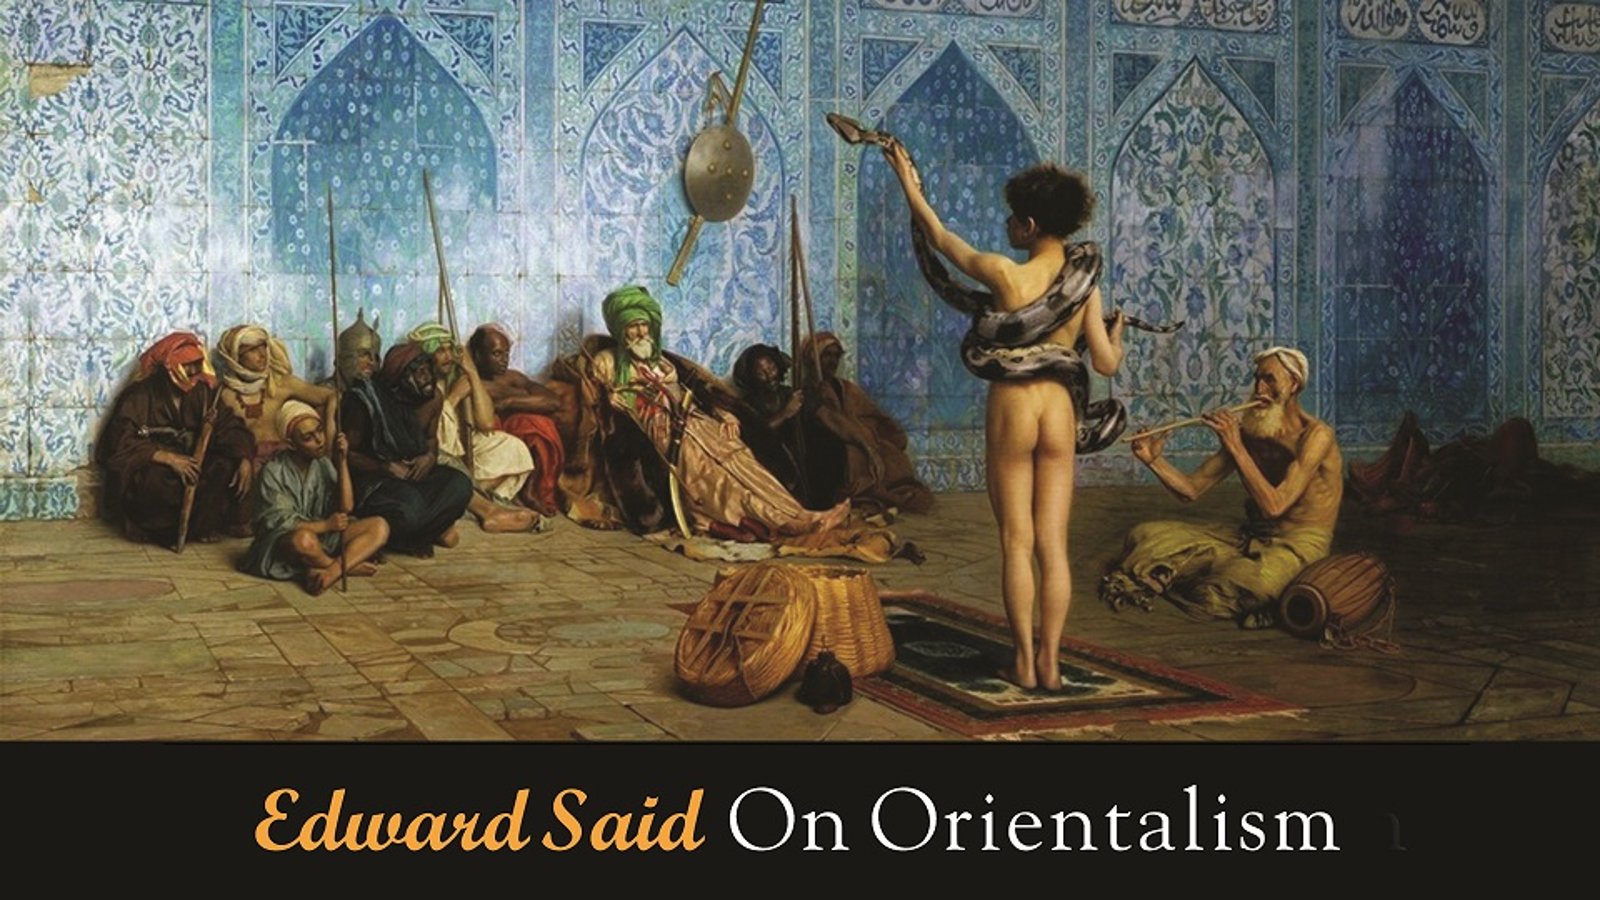 Edward Said On Orientalism - "The Orient" Represented in Mass Media